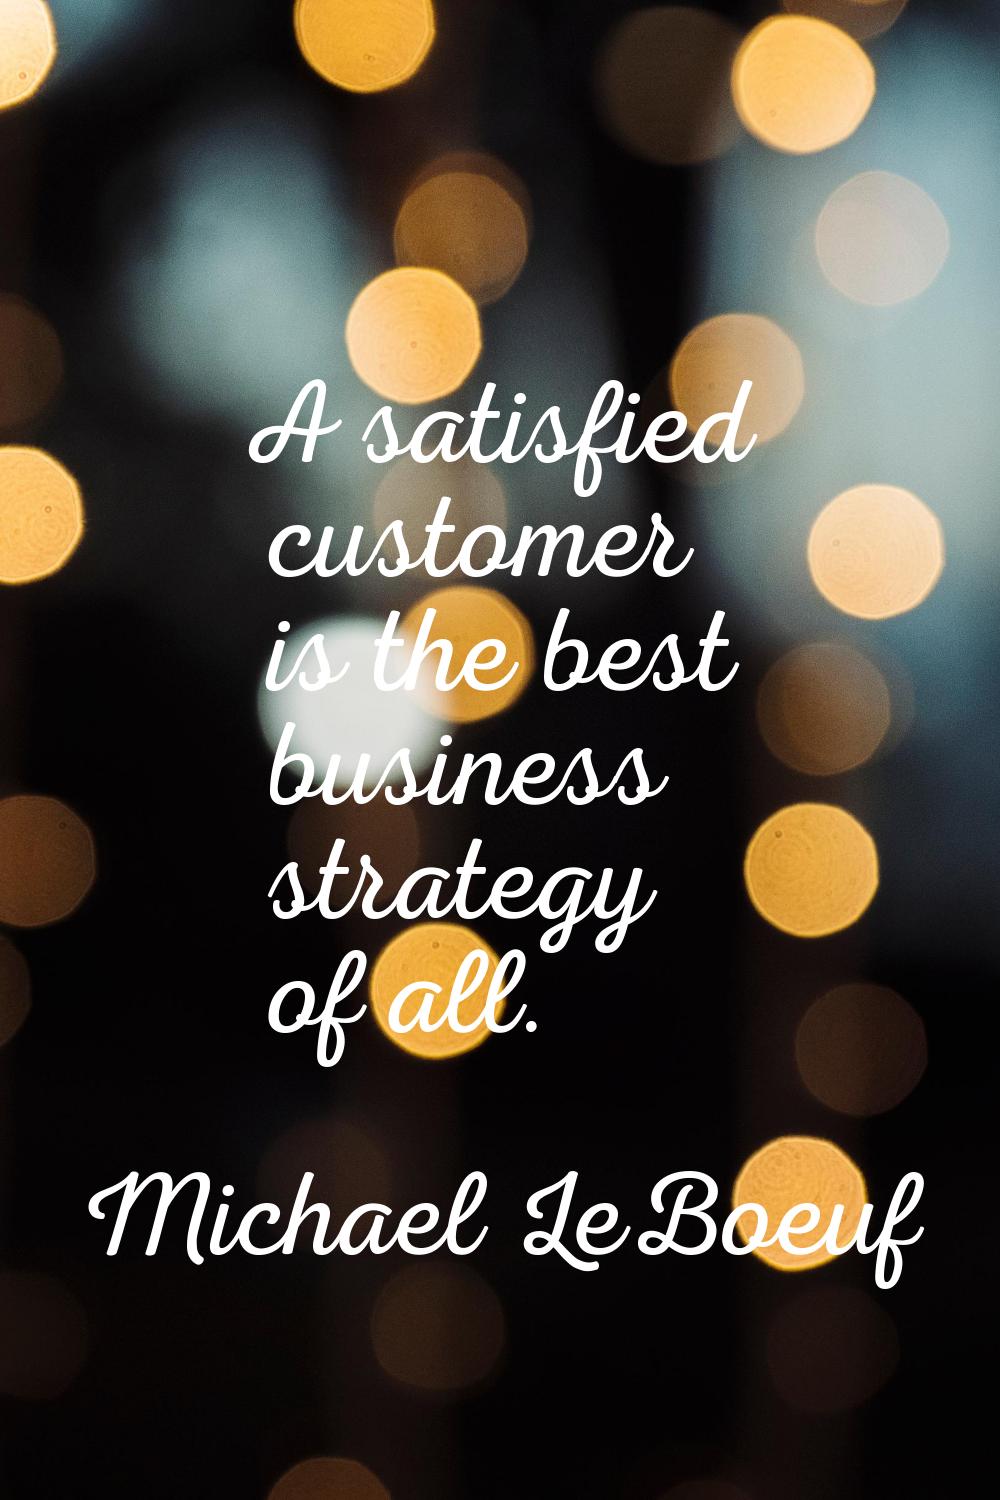 A satisfied customer is the best business strategy of all.